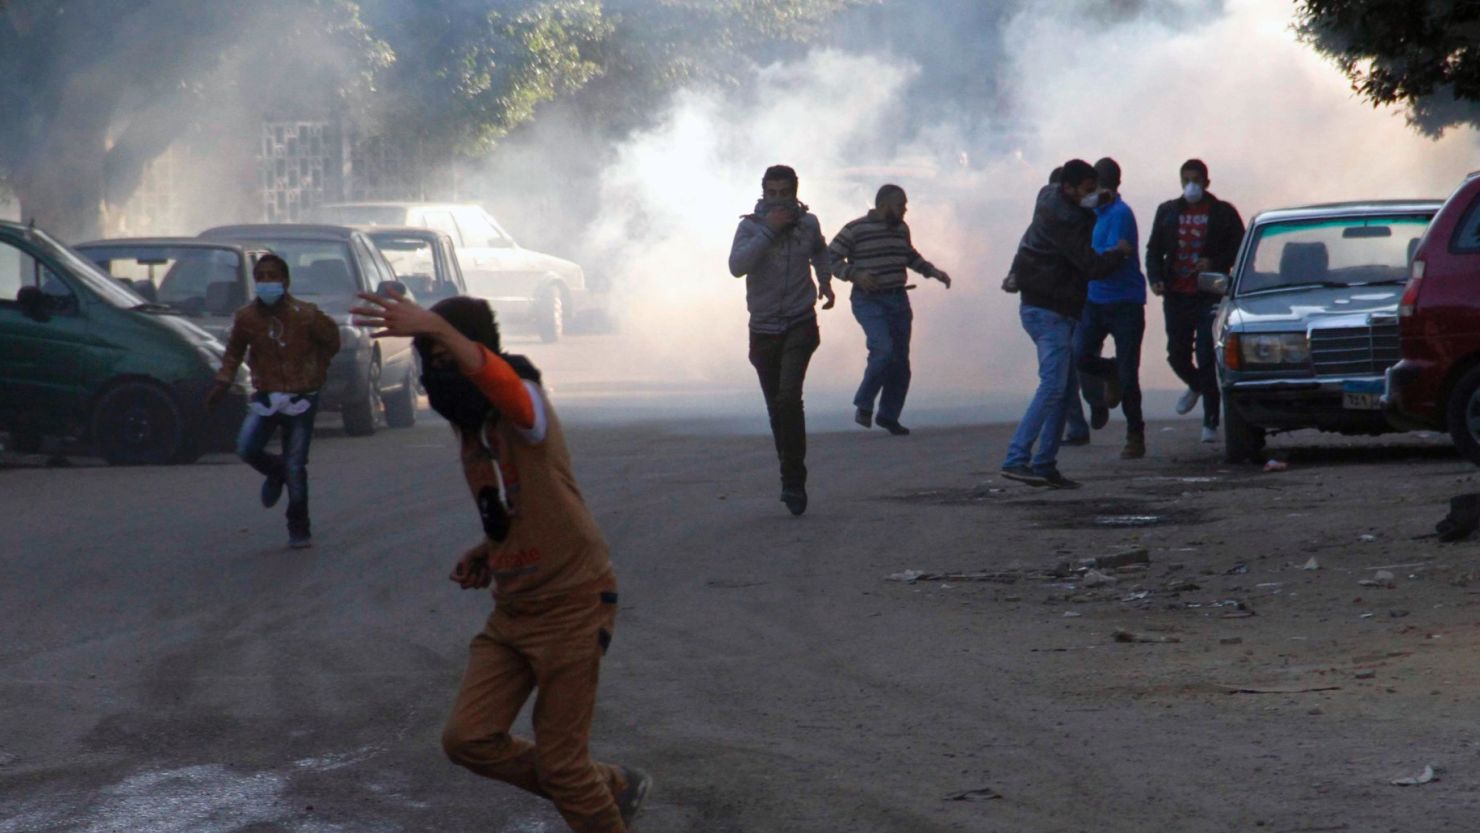 This file photo shows Muslim brotherhood supporters running for cover during clashes with police on the outskirts of Cairo on December 27, 2013.